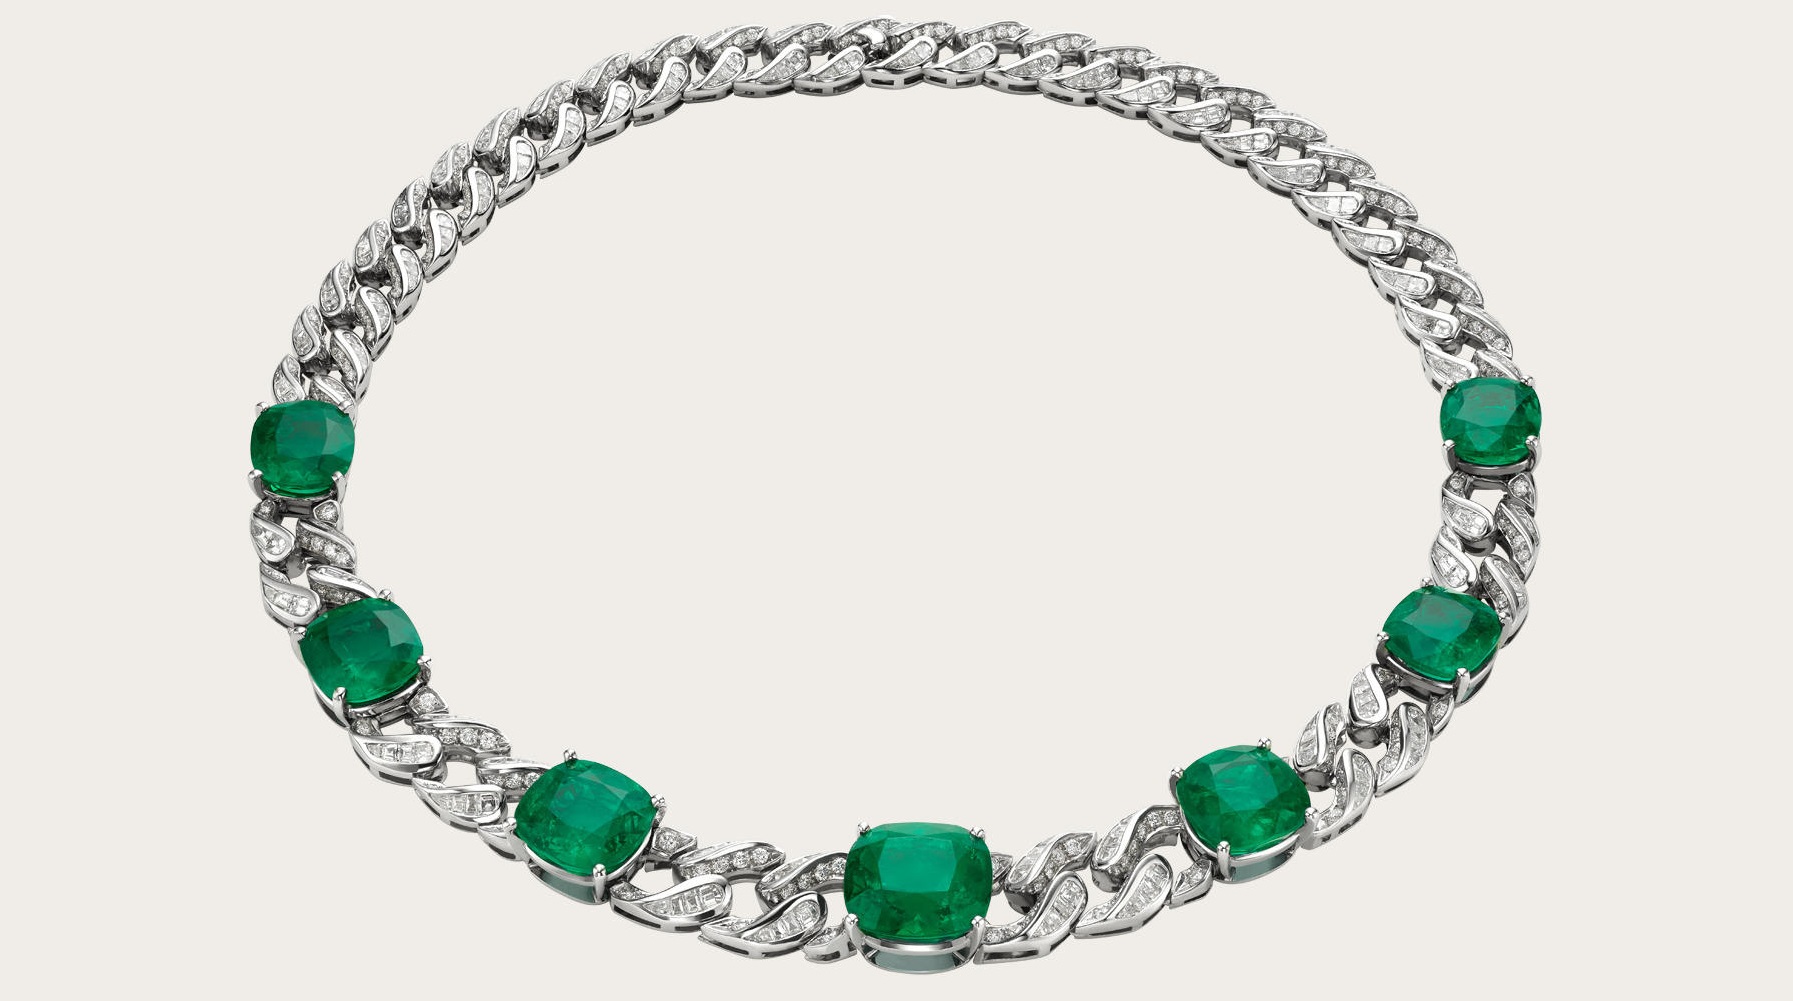 High Jewellry necklace in platinum with 7 cushion shaped emerald (56.4 ct), fancy shaped step cut diamonds and pave diamonds (19.23 ct).